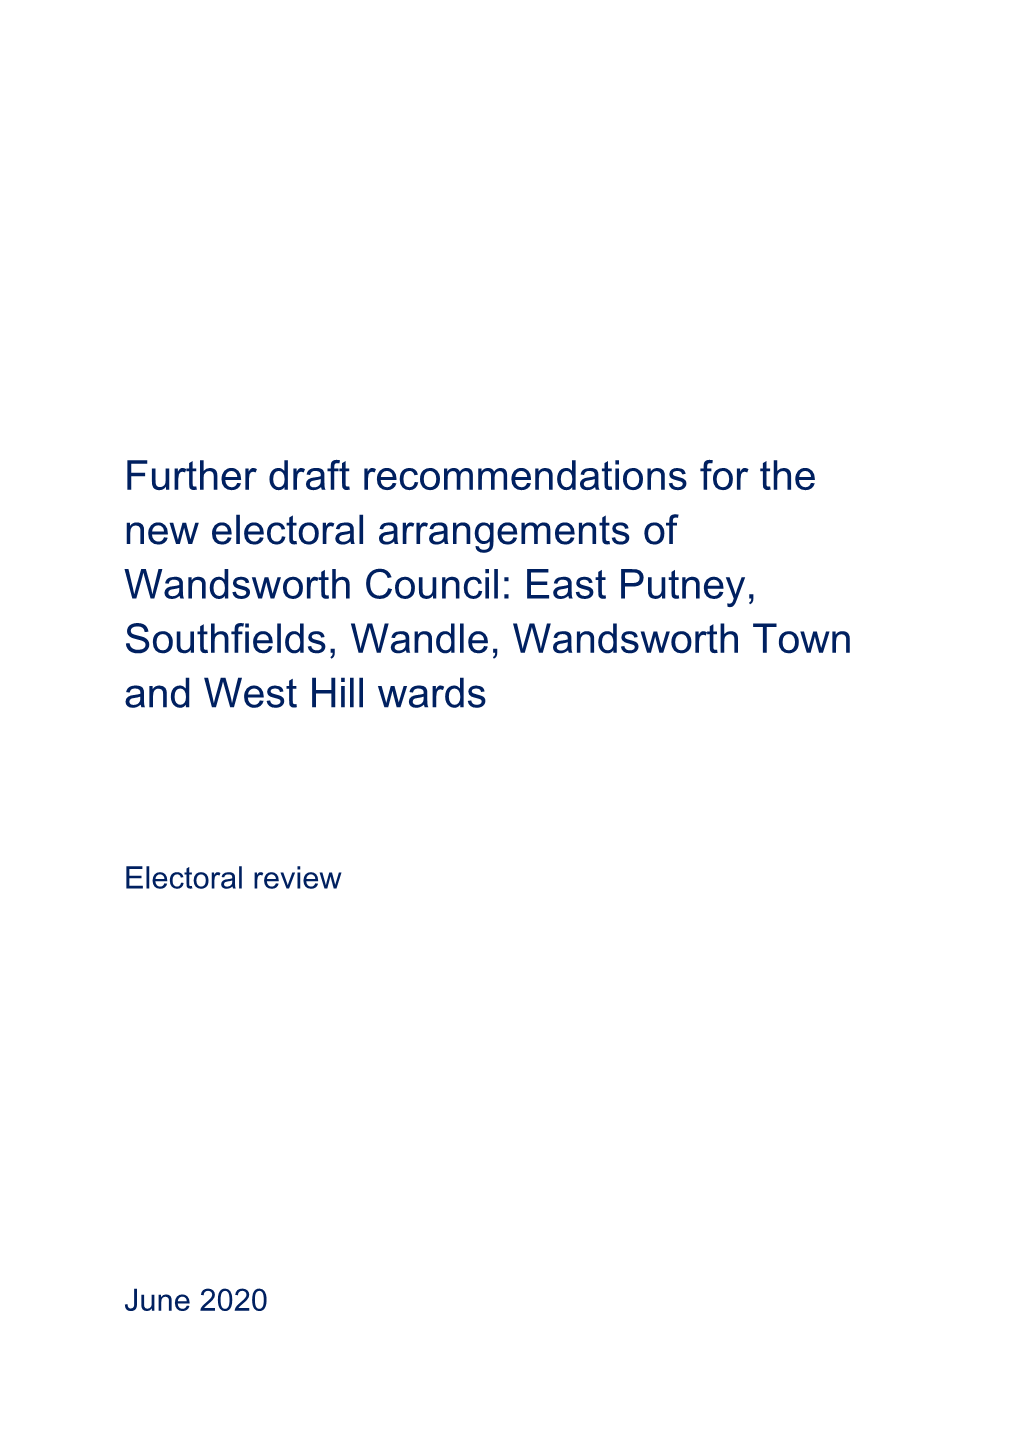 Further Draft Recommendations for the New Electoral Arrangements of Wandsworth Council: East Putney, Southfields, Wandle, Wandsworth Town and West Hill Wards